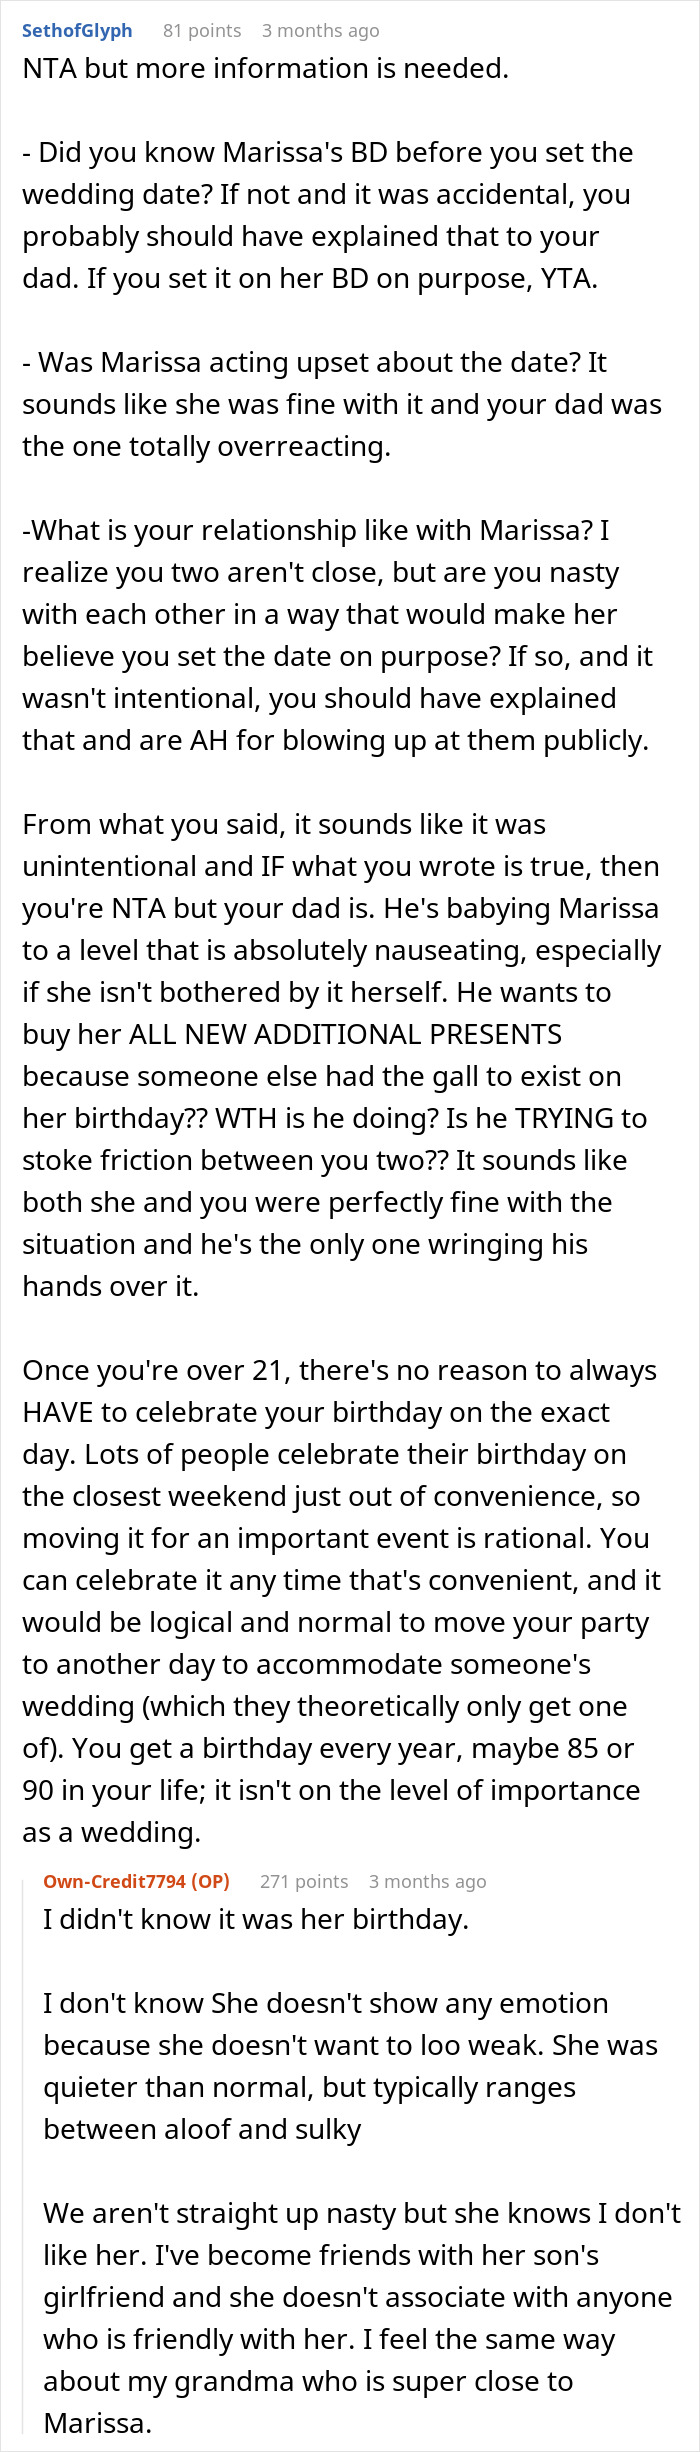 Bride Tells Her Dad To "Take The Child He Is Dating And Get Out" As He Felt Bad About Spending His Fiancée's Birthday At Daughter's Wedding